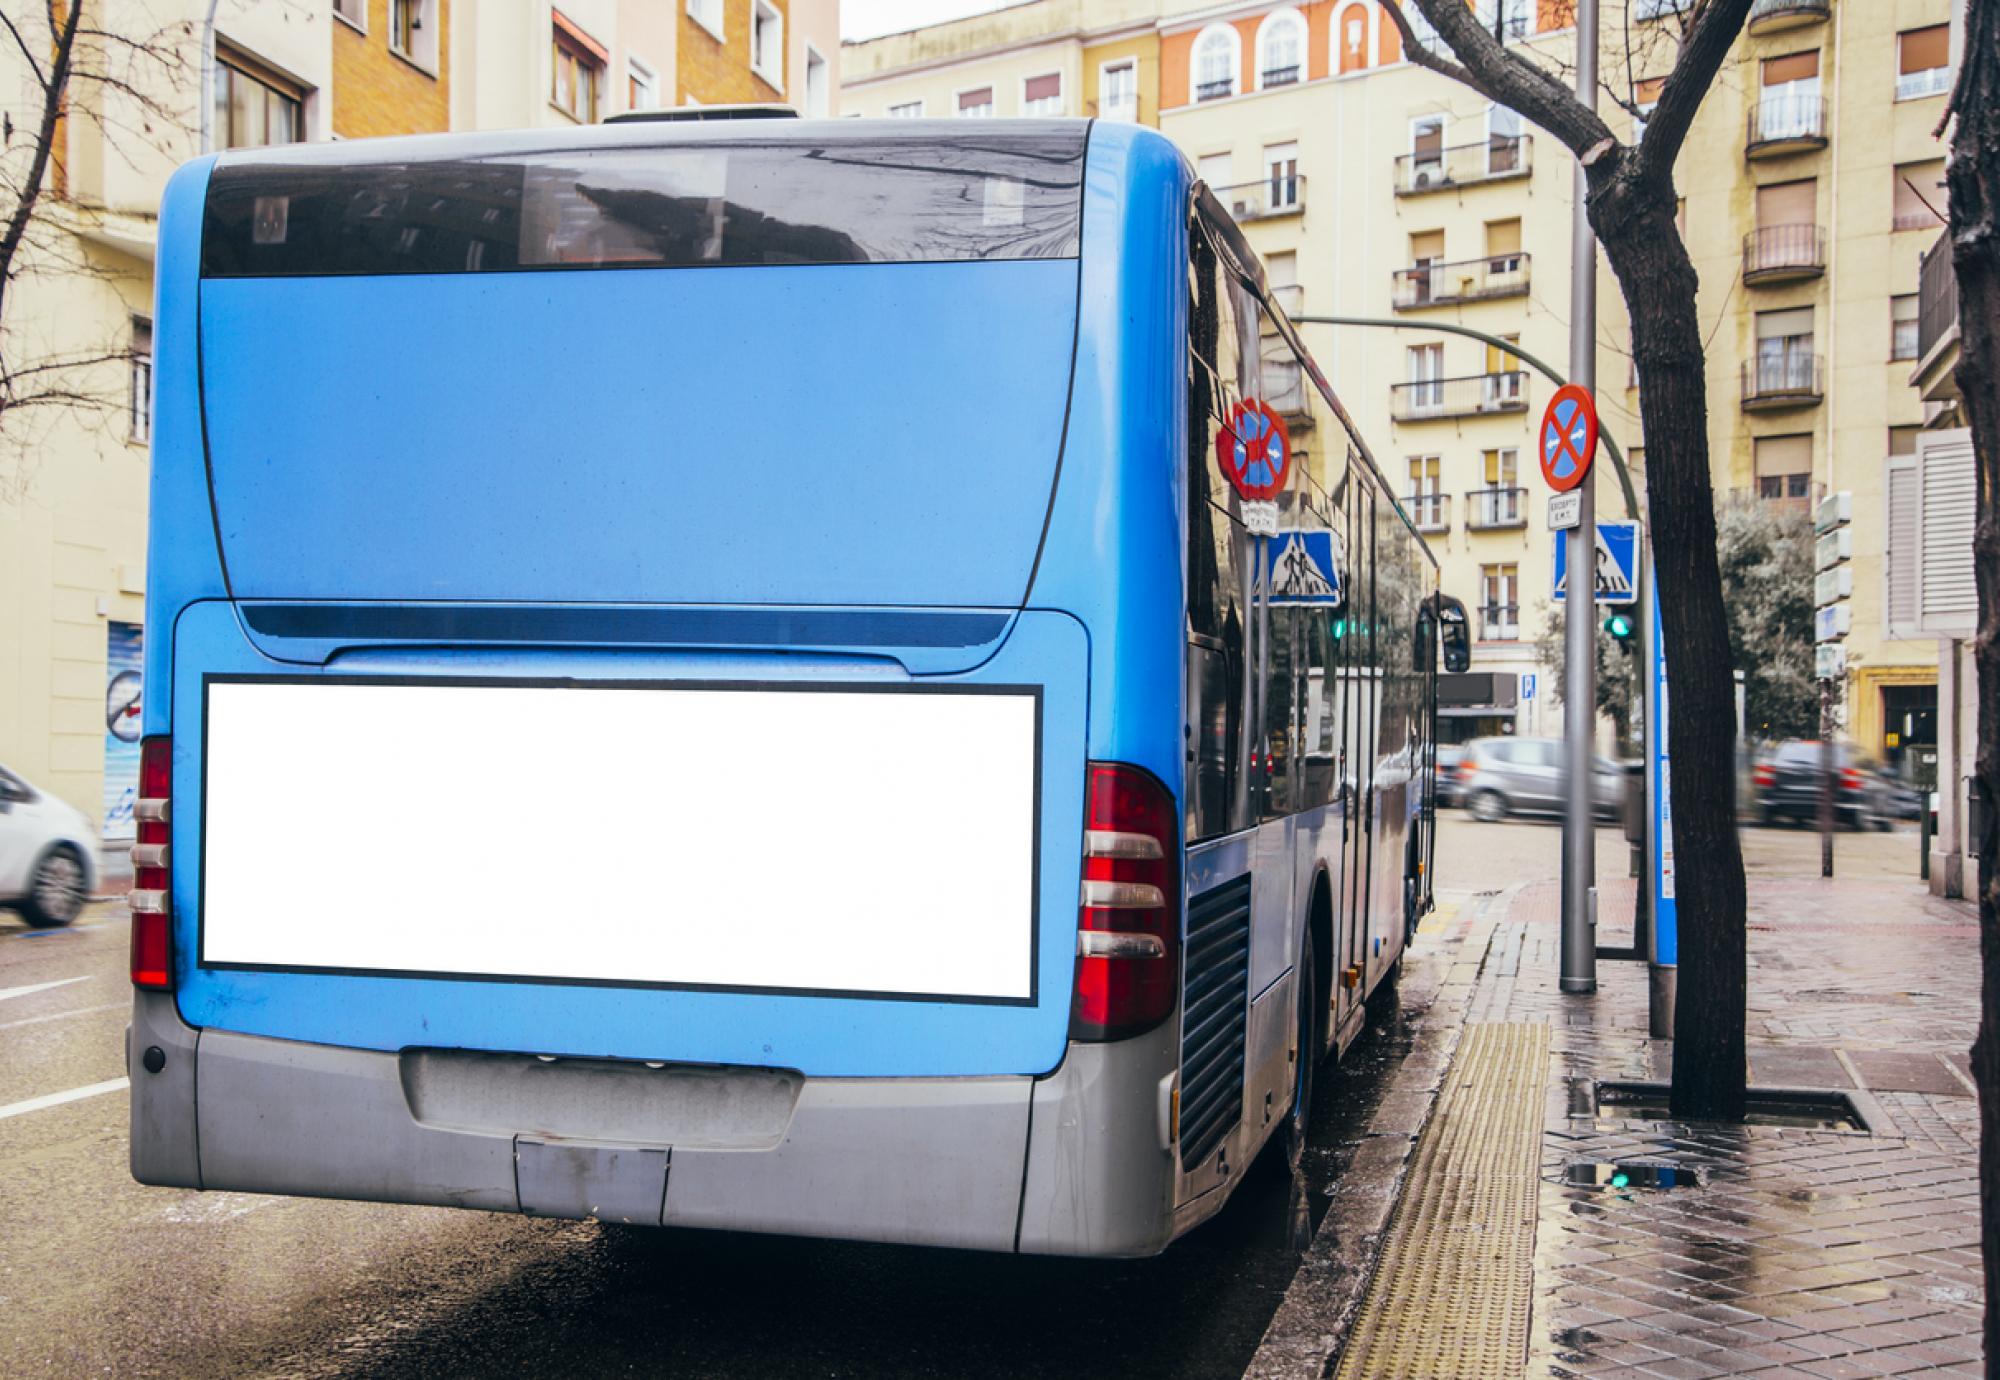 Rear-view shot of a blue bus